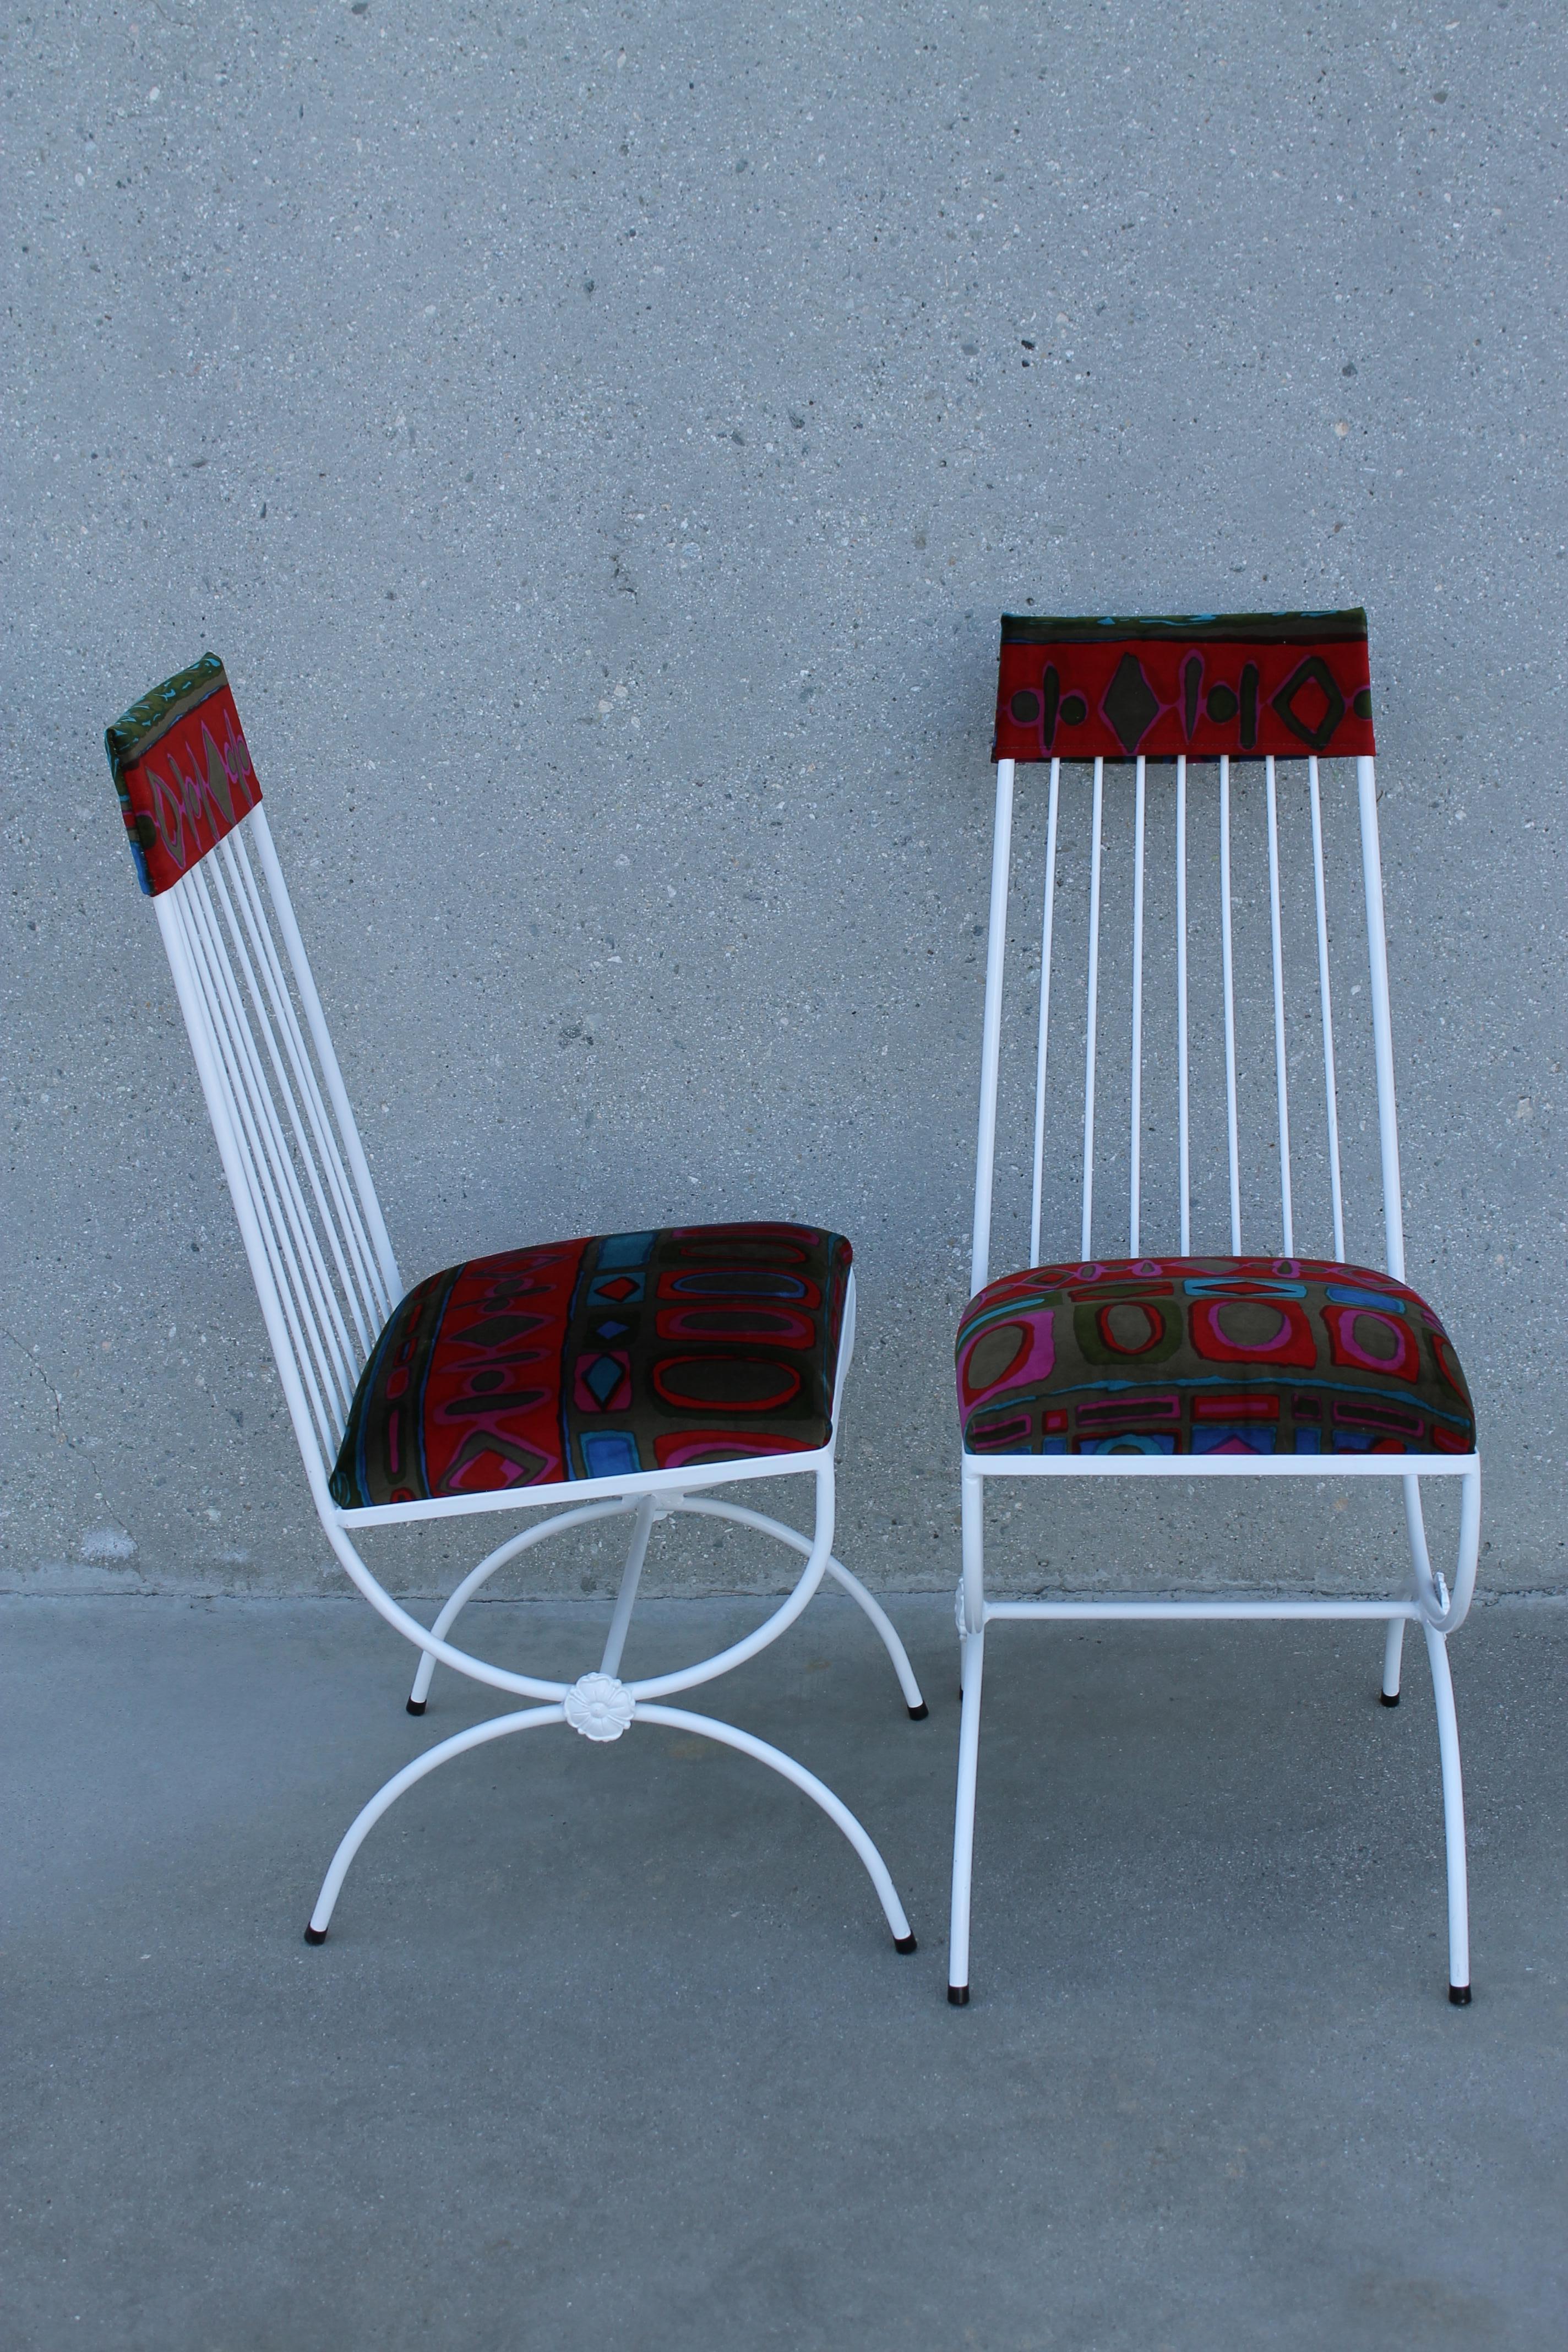 Pair of accent indoor patio chairs. Fabric is Anita Askild and Larsen Design, 1962 for Jack Lenor Larsen. We had the chairs professionally powder coated a satin white with new cushions of Larsen fabric. Each chair measures 14